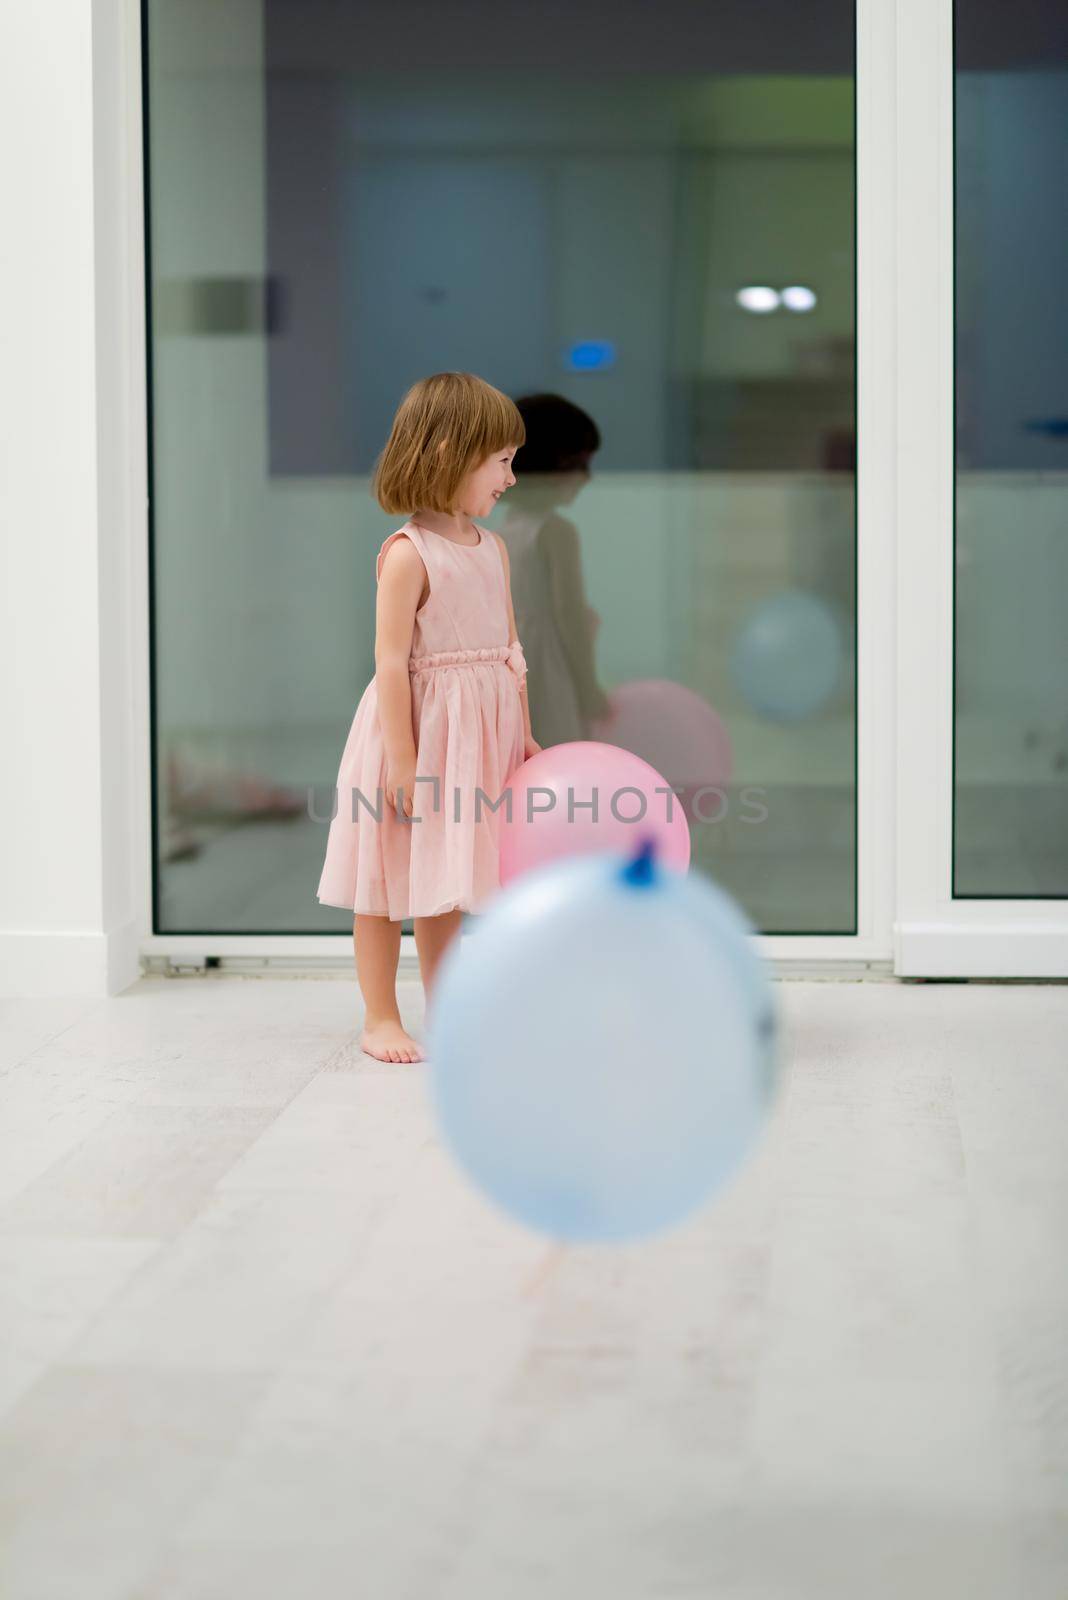 happy cute little girl in a pink dress enjoying while playing with balloons on beautiful evening near the window at home